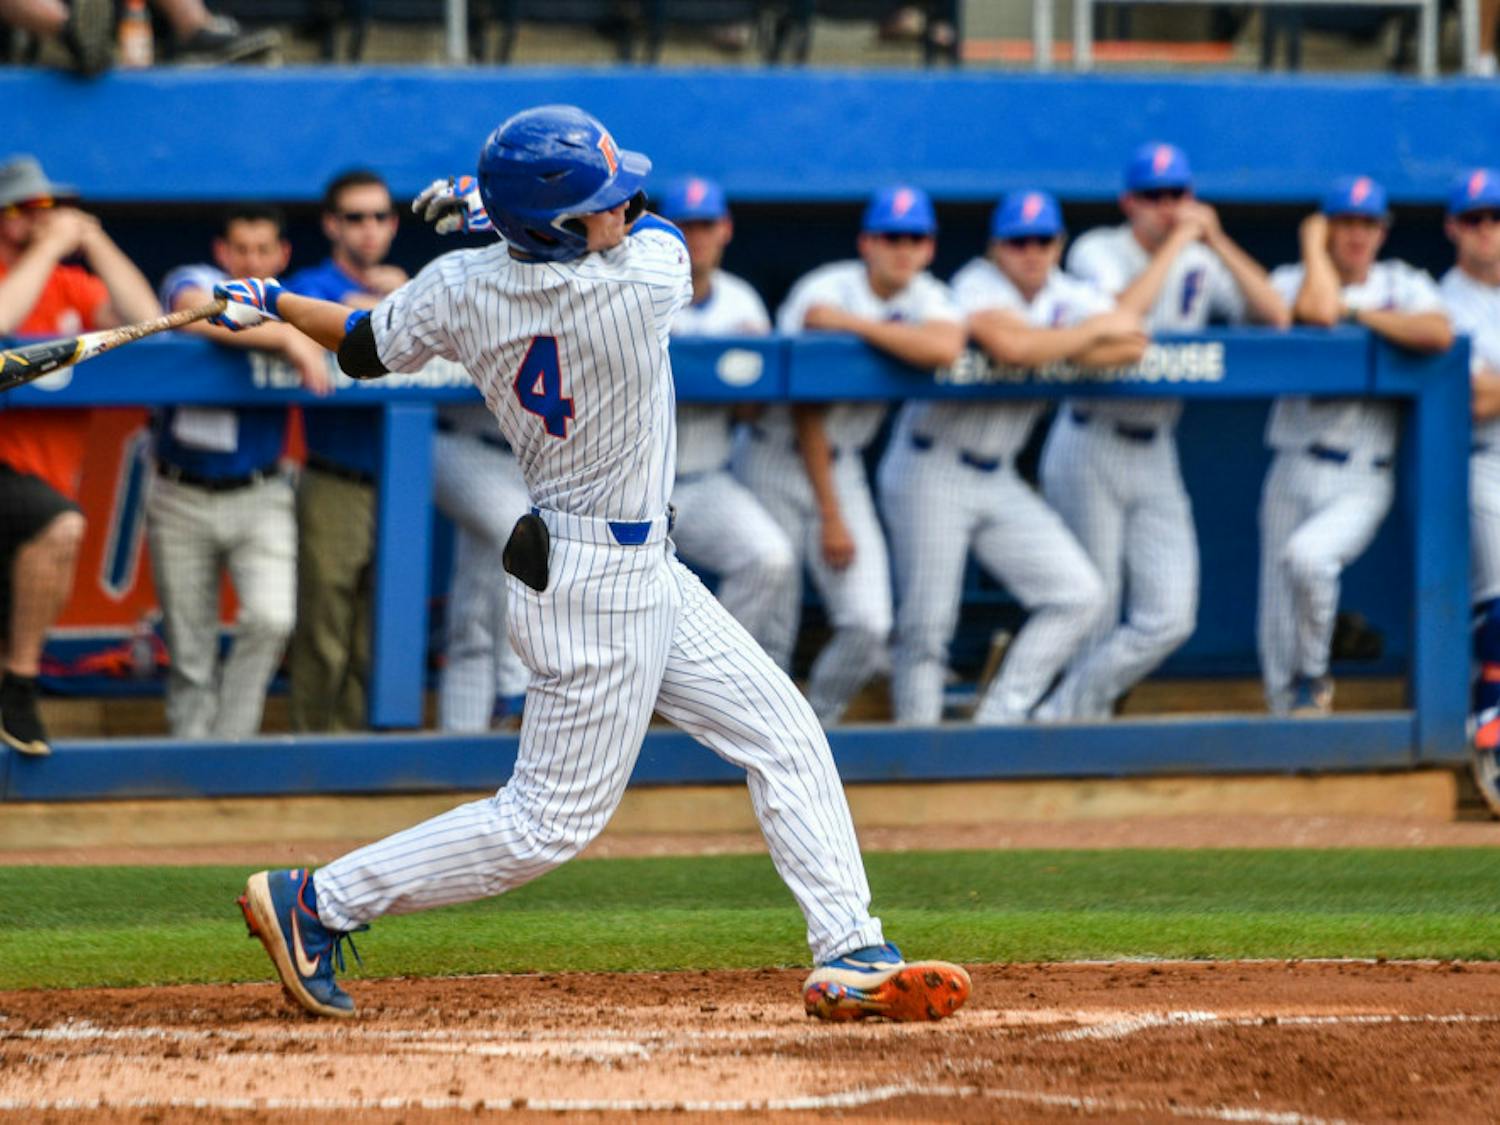 Florida outfielder Jud Fabian declined the MLB and announced in July that he would rejoin the Gators for 2022